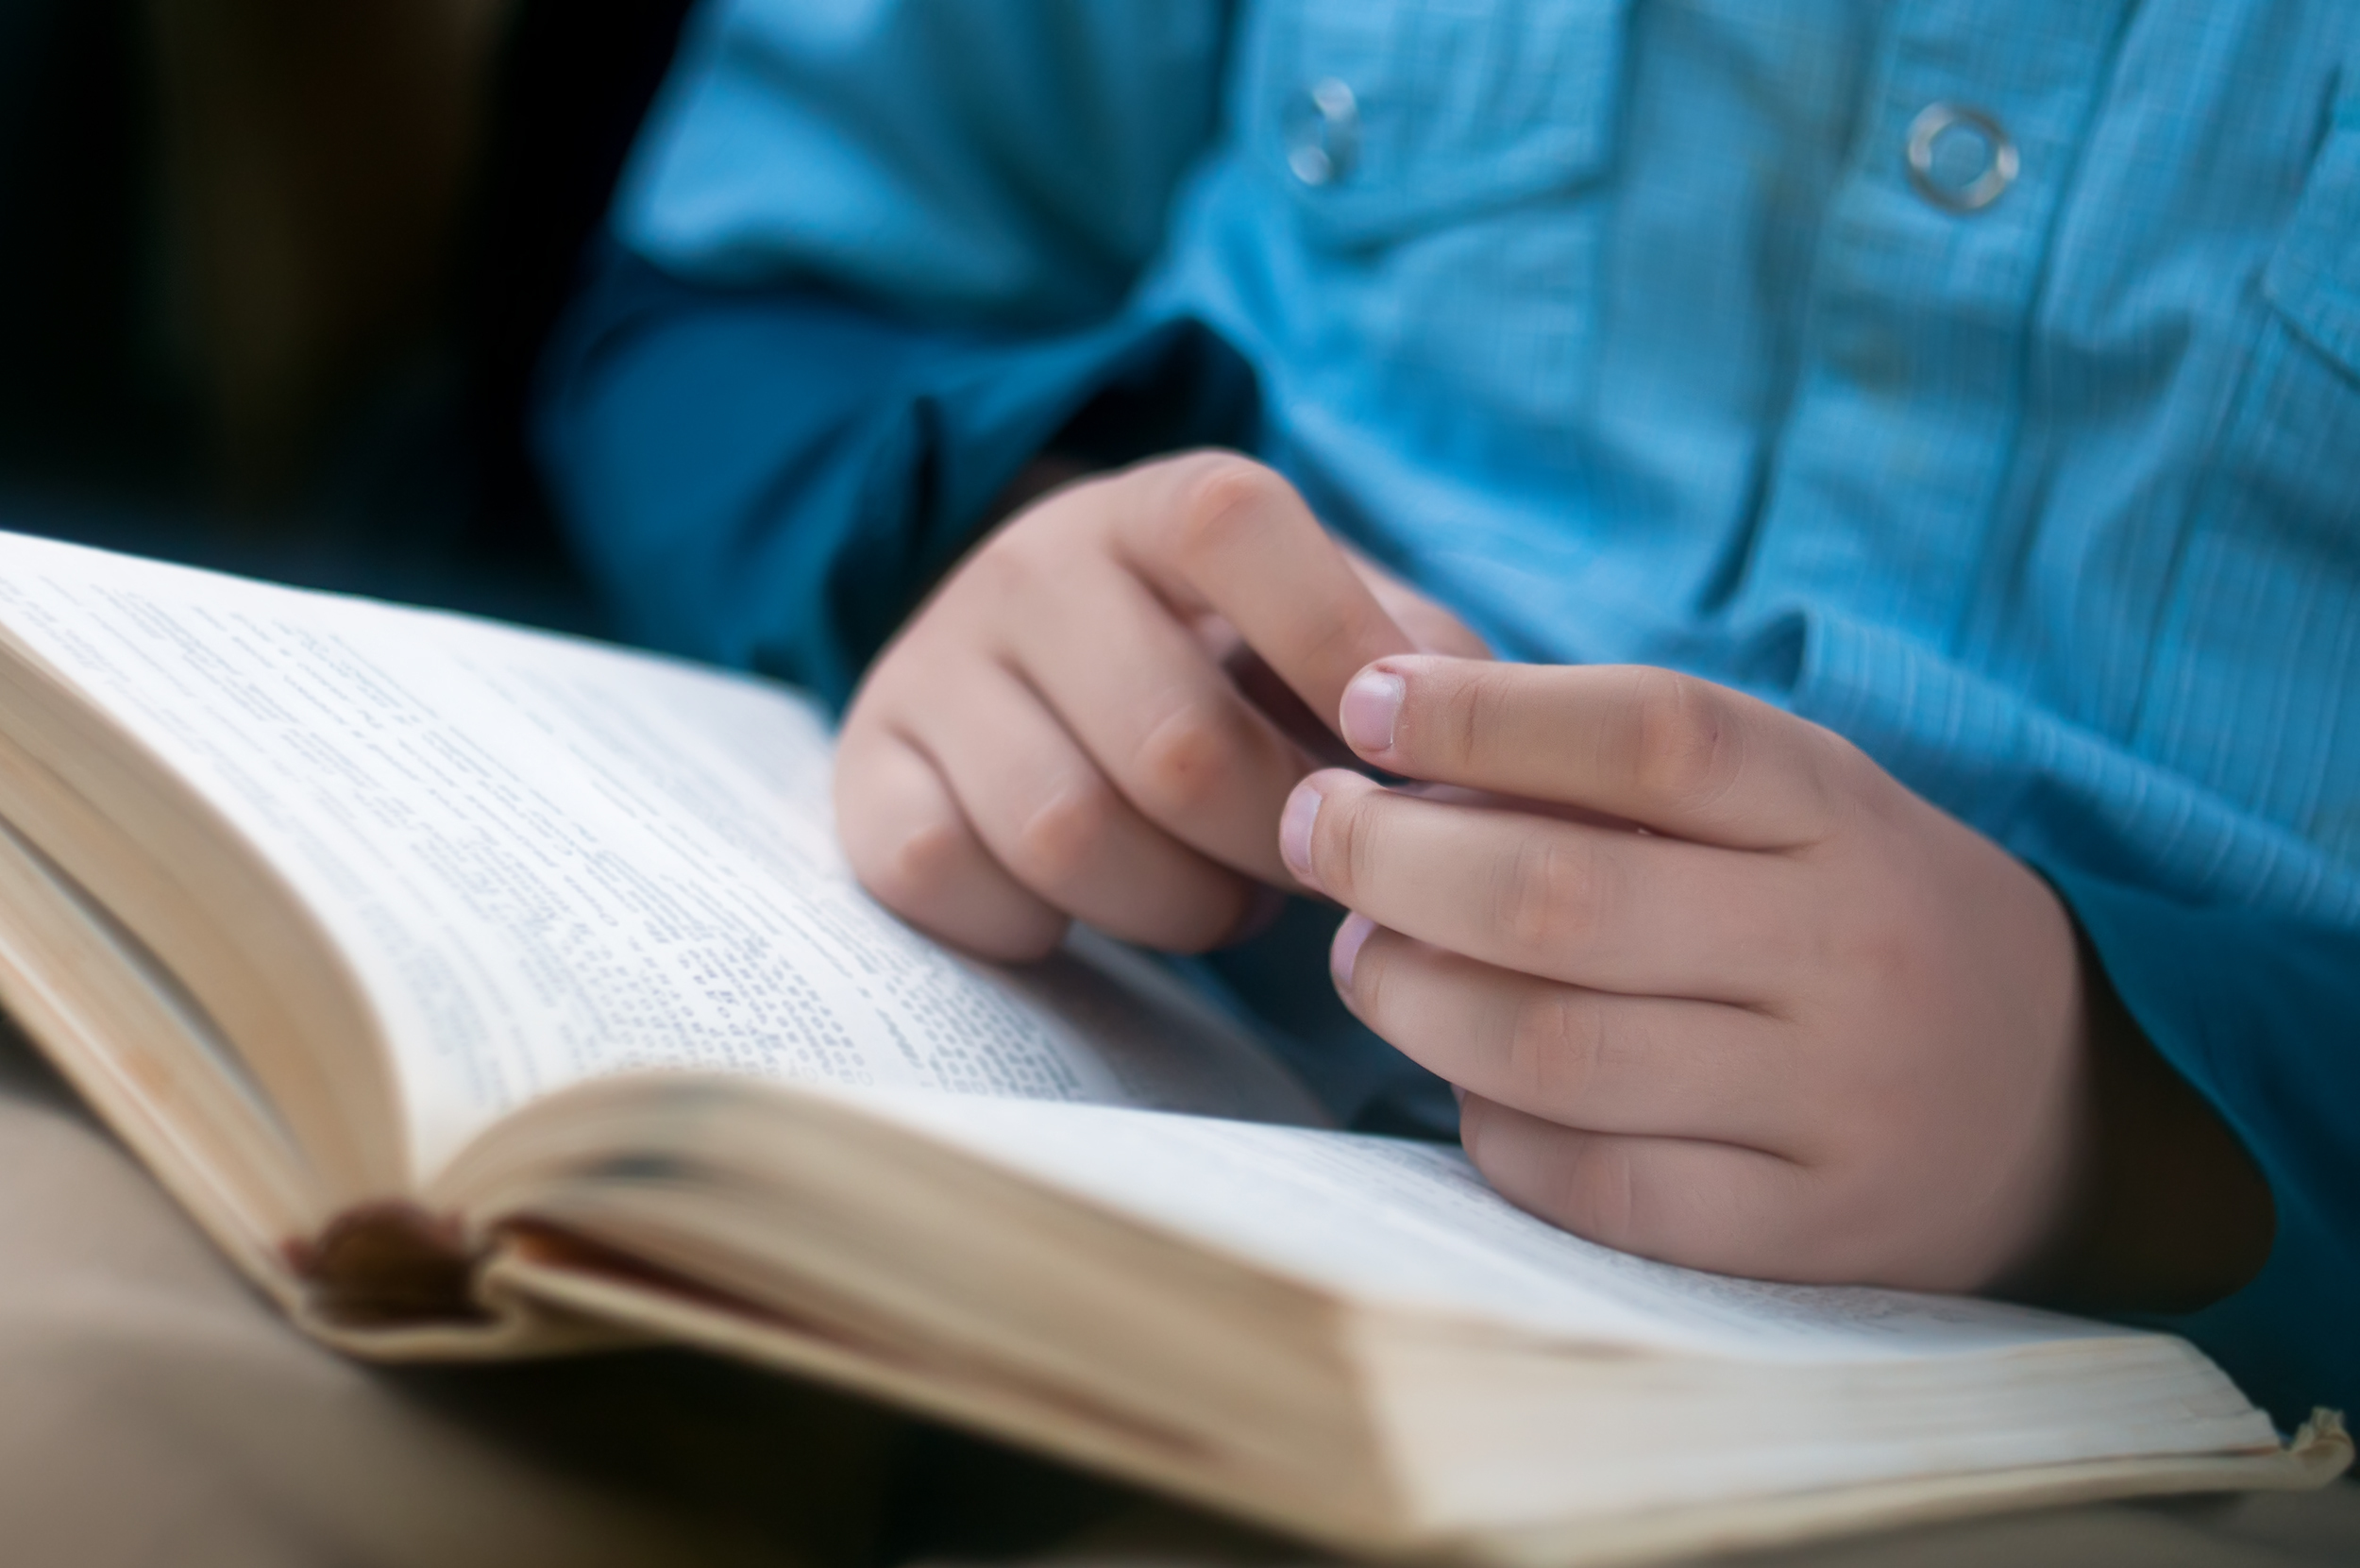 Child hands are on the open book (Yuliya Evstratenko/Shutterstock)